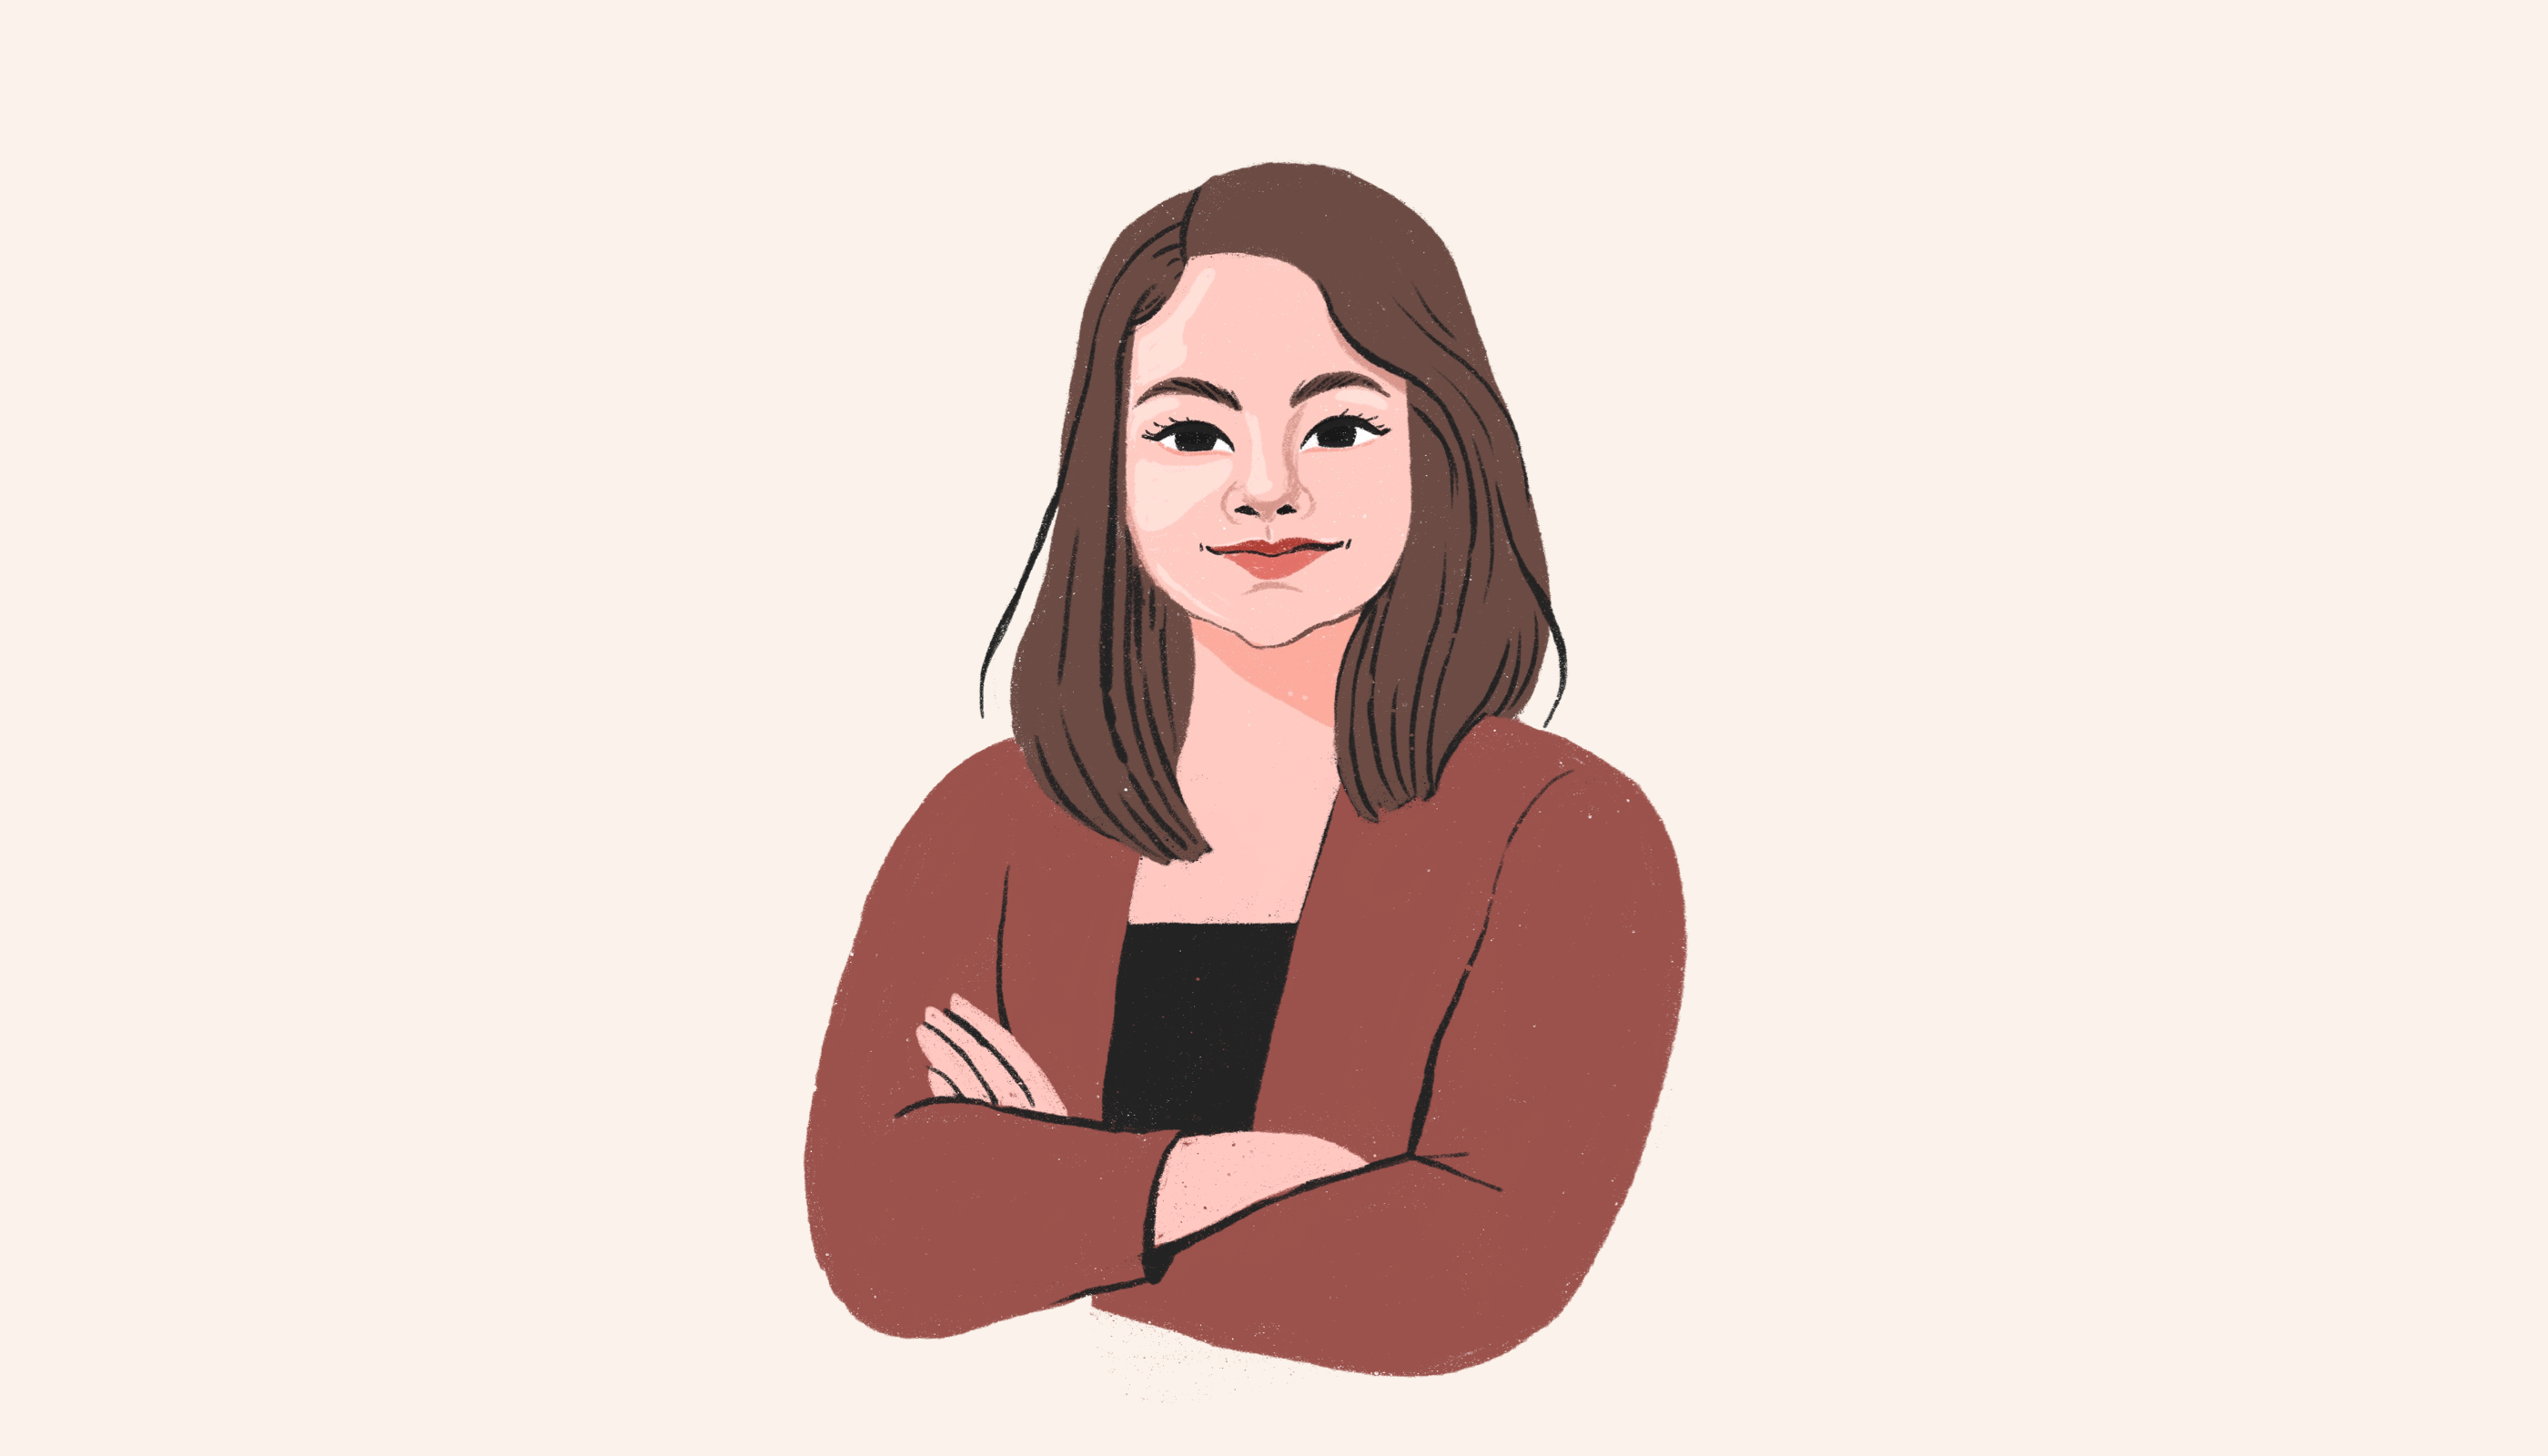 Q&A with Jocelyn Perron, Head of Design and Research at Wistia